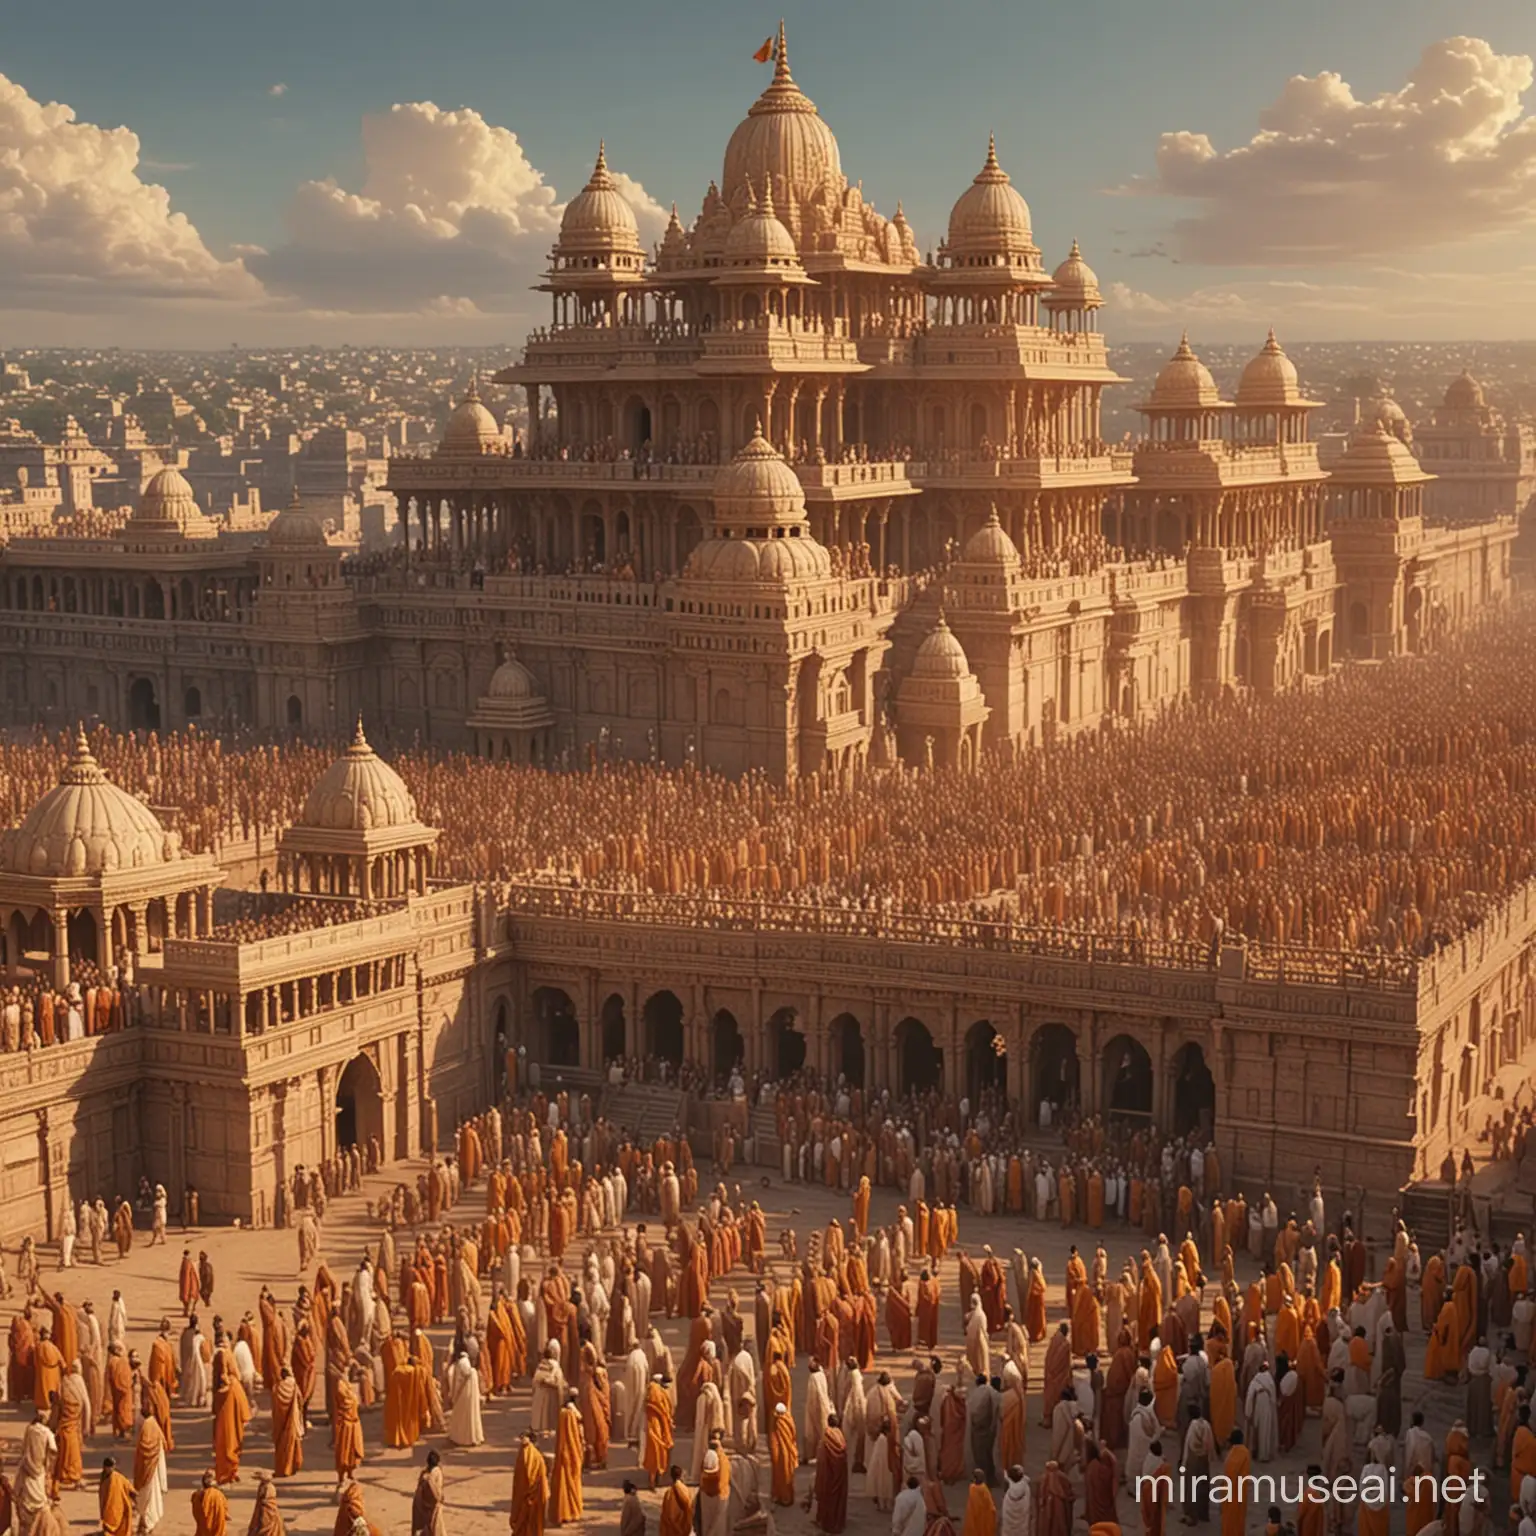 Establishing shots of Ayodhya, the capital city of King Dasharatha's kingdom.
Introduction to King Dasharatha, showcasing his virtues and love for his people.